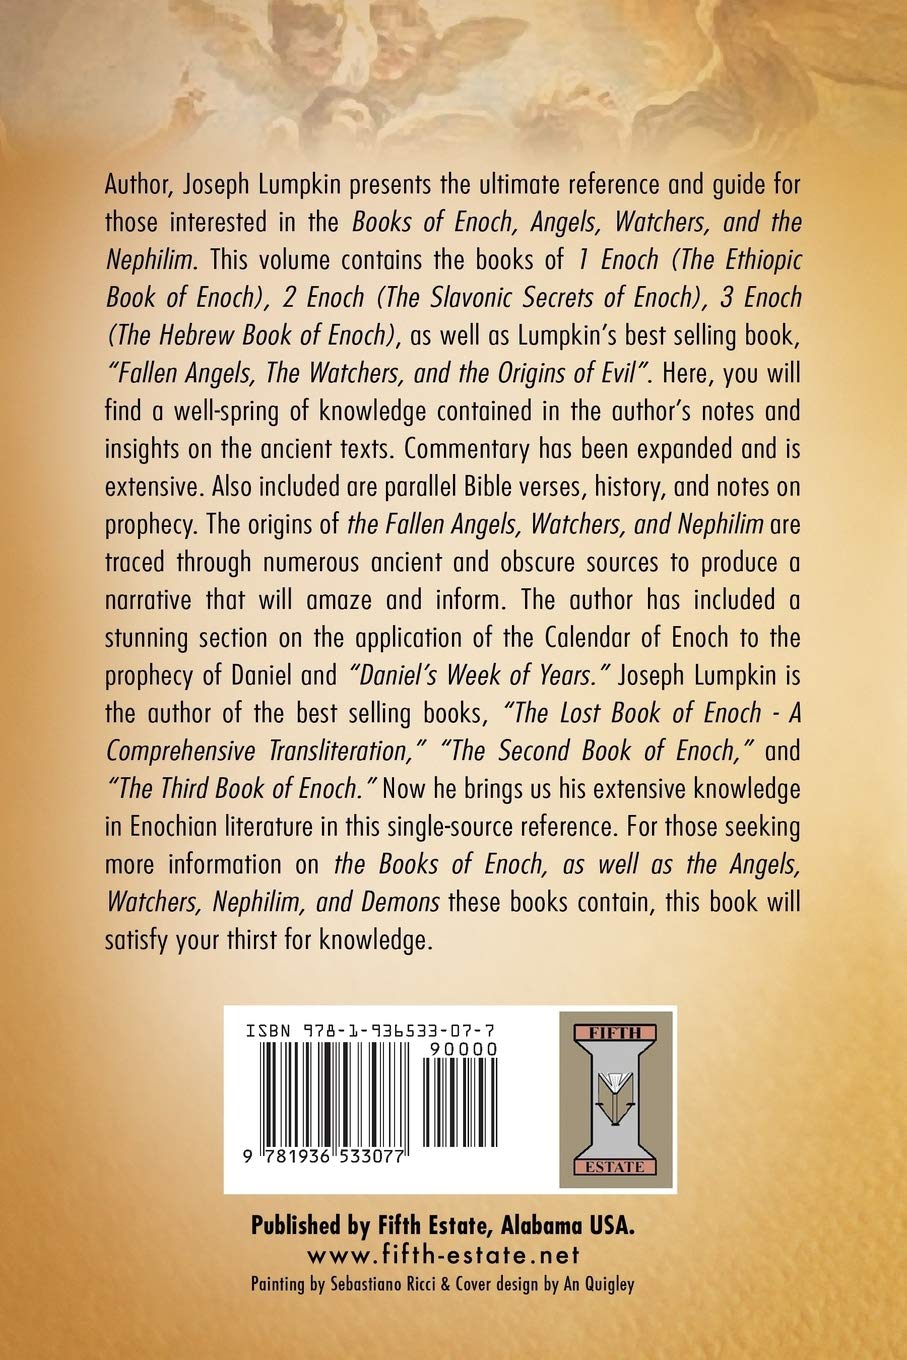 The Books of Enoch: The Angels, The Watchers and The Nephilim: (With Extensive Commentary on the Three Books of Enoch, the Fallen Angels, the Calendar of Enoch, and Daniel's Prophecy)